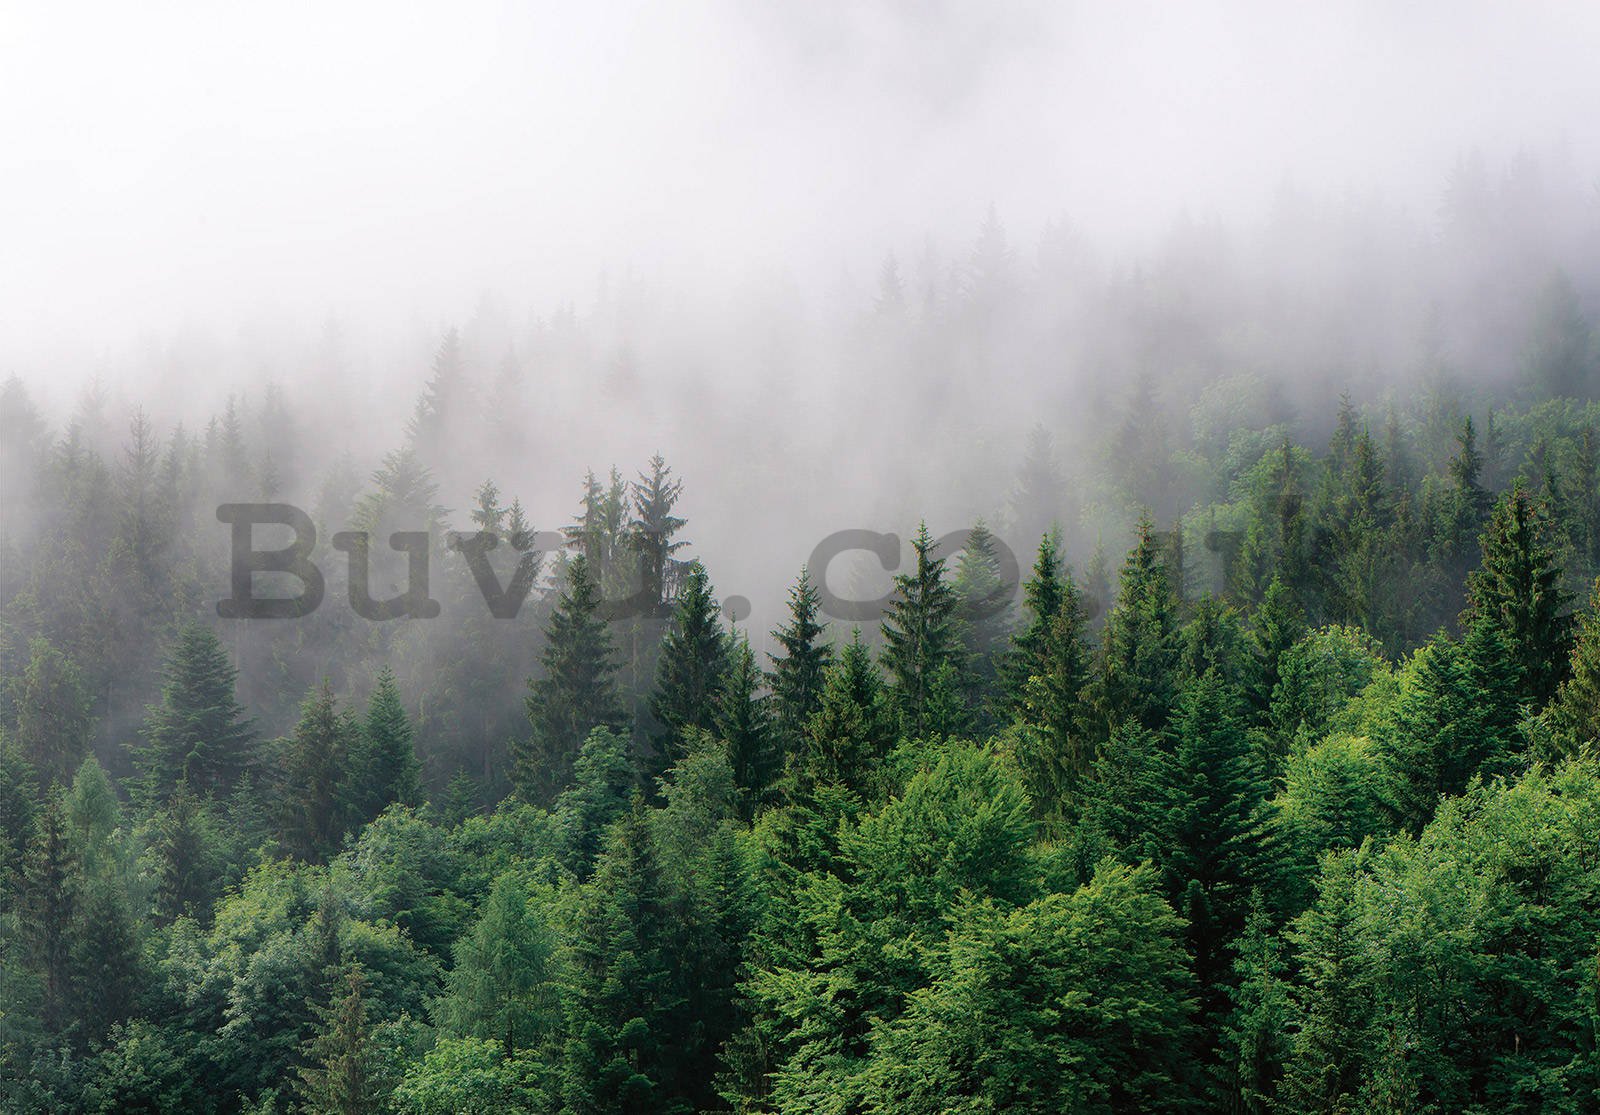 Wall mural vlies: Fog over the forest (2) - 368x254 cm